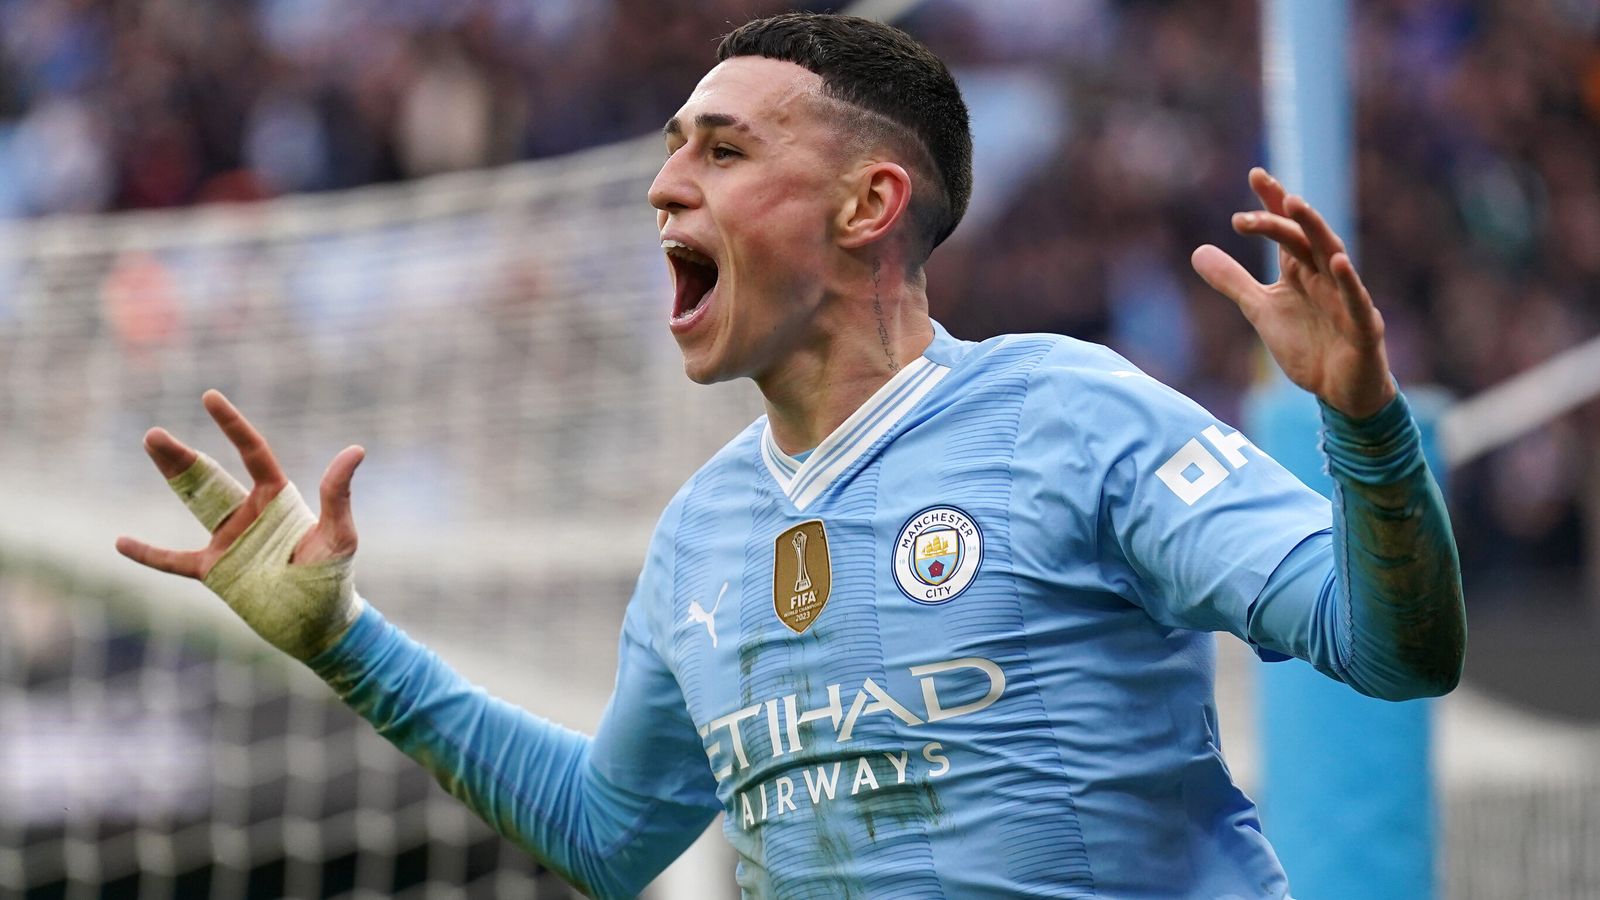 Phil Foden inspires as Man City come from behind to win derby